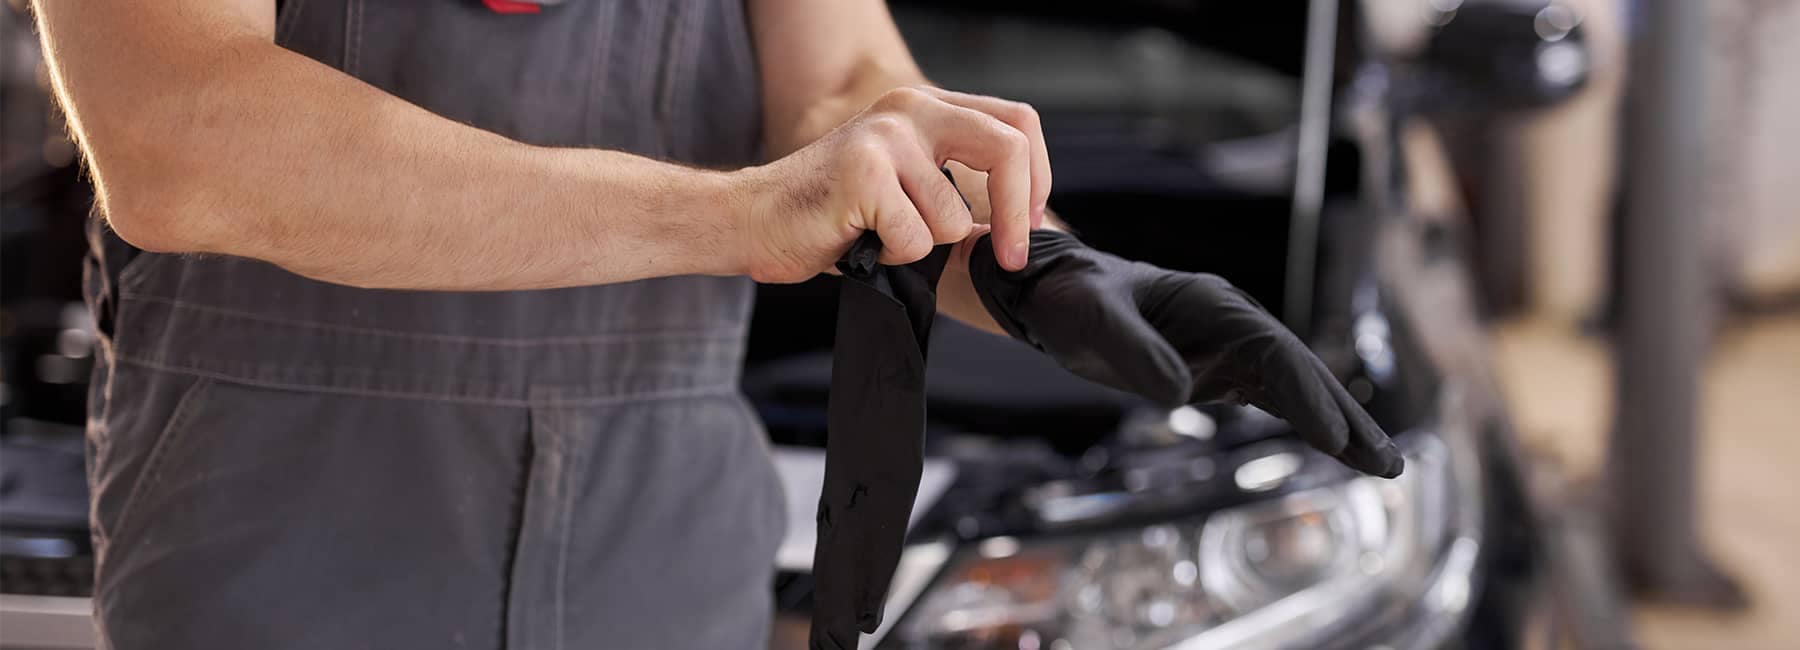 Mechanic donning gloves to work on an engine